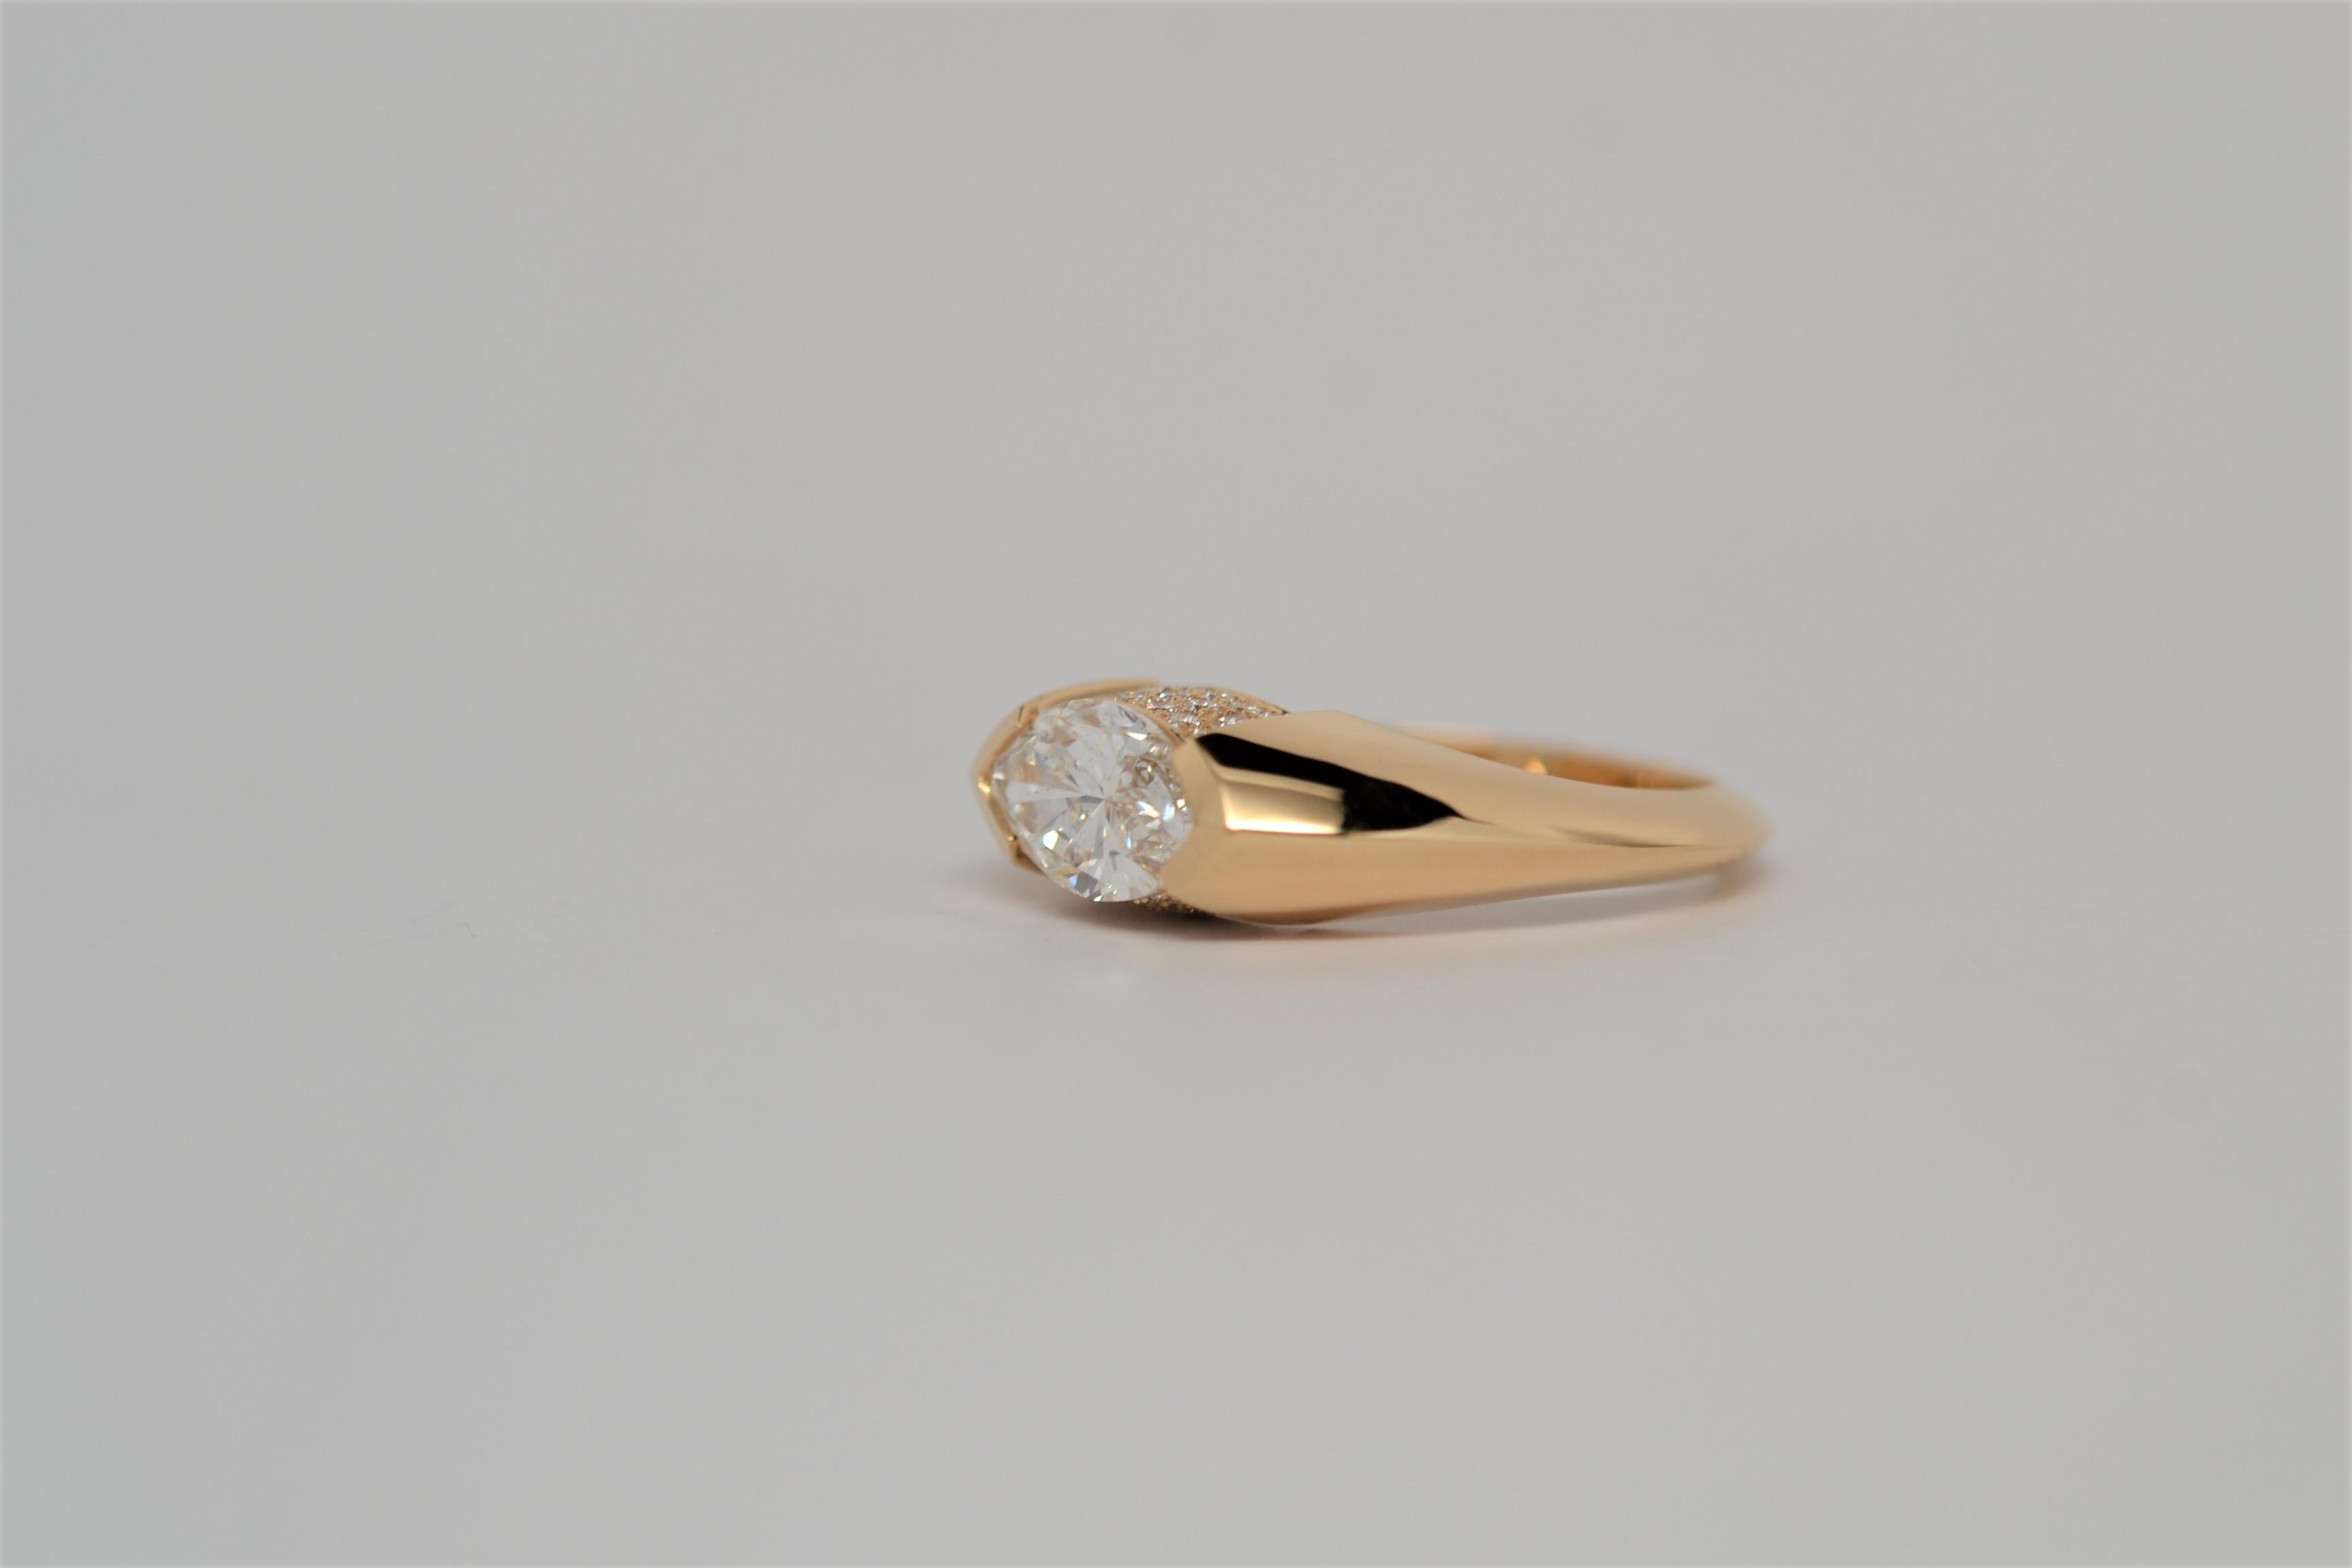 GIA Certified 1.11 Carat Marquise Brilliant Cut Diamond Ring Set in 18k In New Condition For Sale In New York, NY